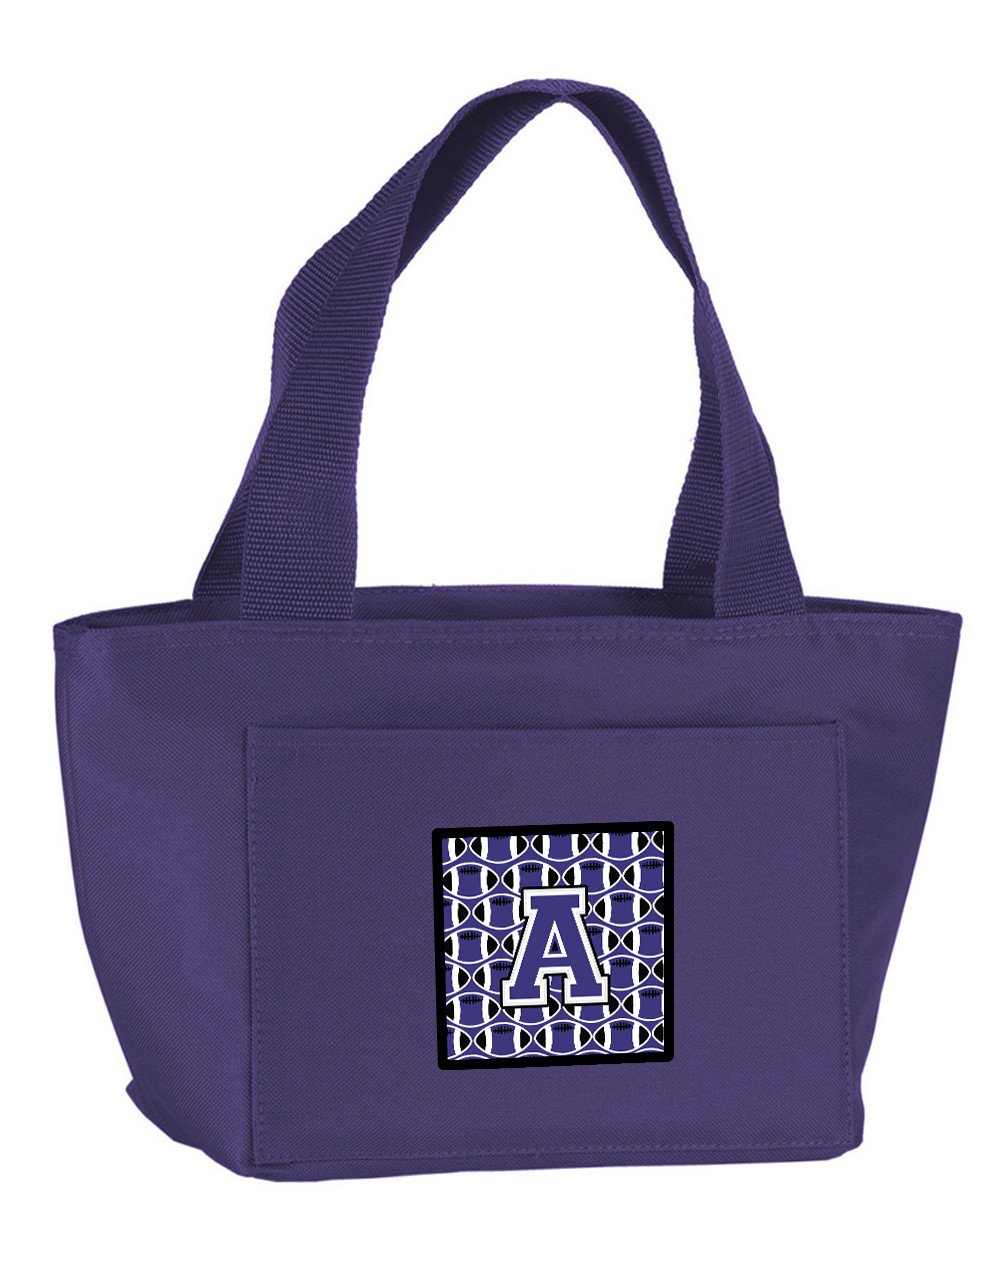 Letter A Football Purple and White Lunch Bag CJ1068-APR-8808 by Caroline's Treasures